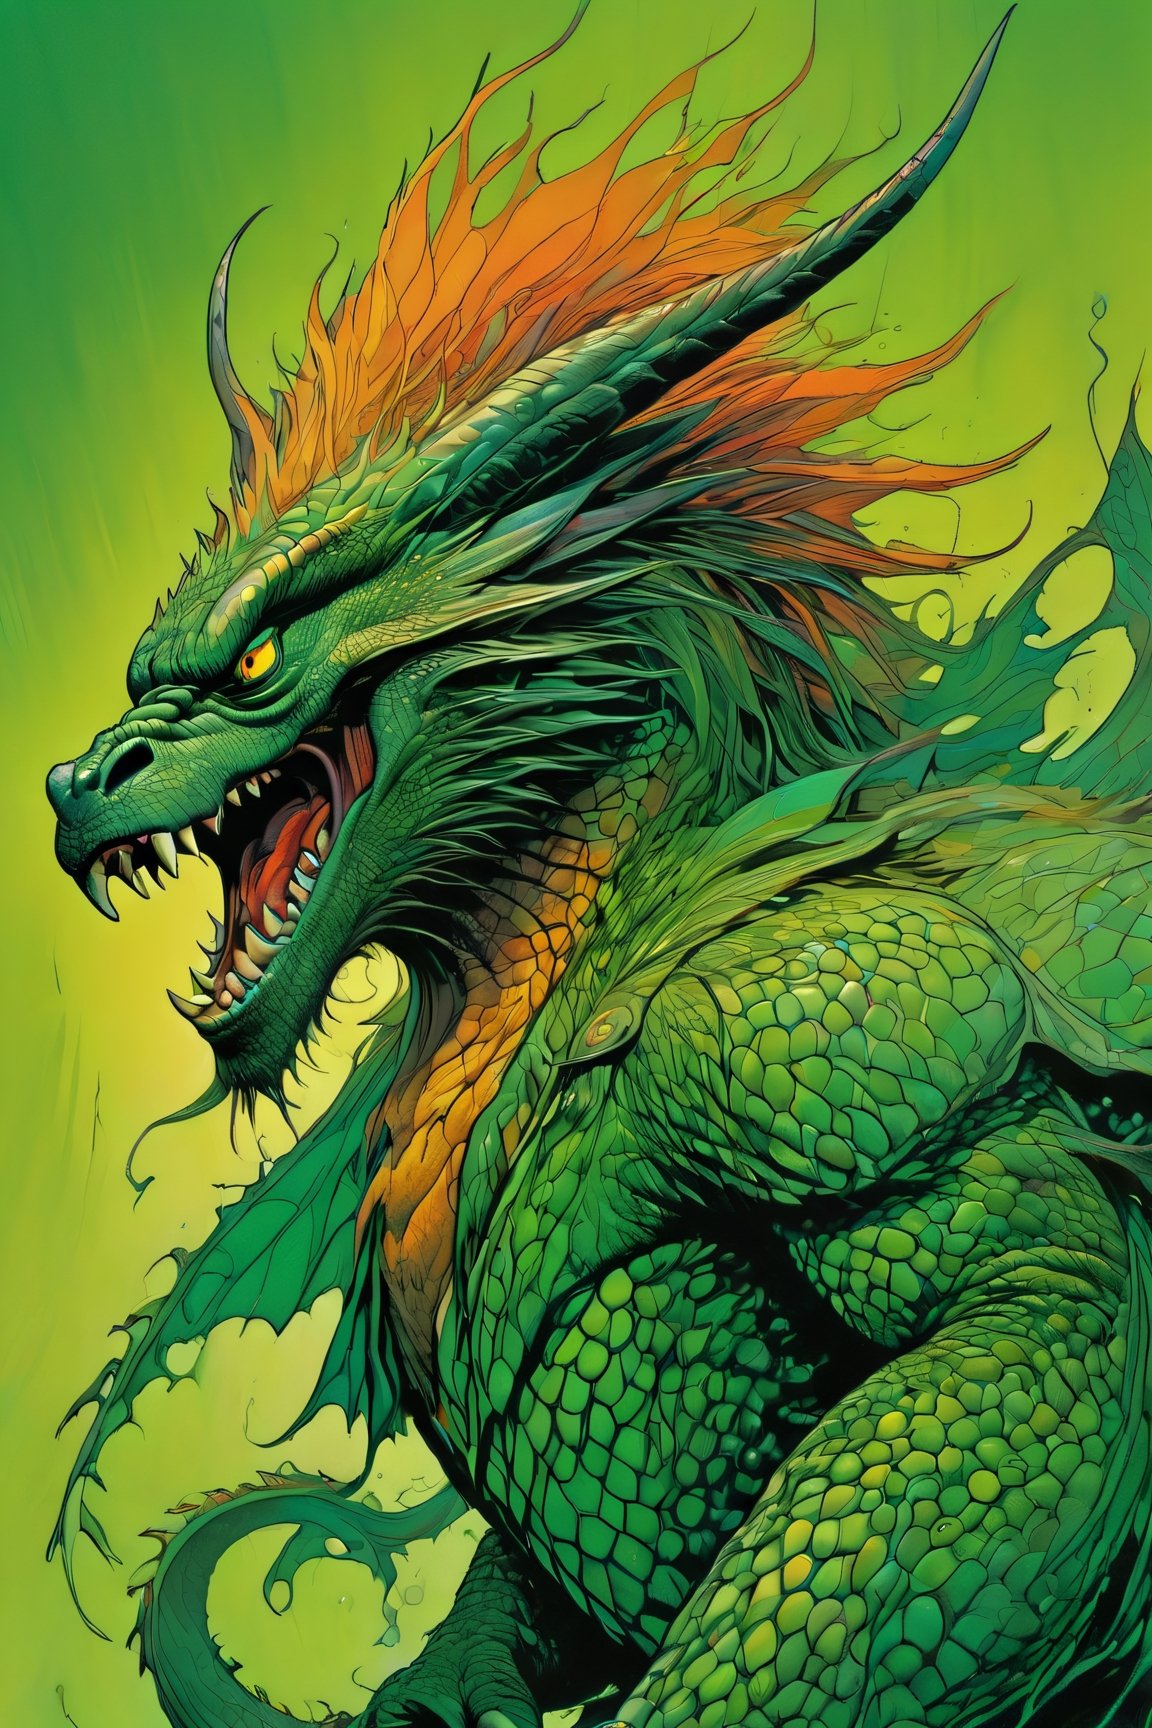 close up of A dragon face,  screaming at the viewer, raging, long hair, the arm and shoulder are covered in a very detailed intricate Green and Orange dragon tattoo that is protruding outfrom the skin, coming alive, its screaming, scratching, similar to dragon tattoo by Boris Vallejo, slowly you see the small dragon tattoo in parts is coming out of the skin and becoming a real version of the tattoo, sticking out, scales, extended claws, spit, spittle, blood drops, 16K, movie still, cinematic, ,omatsuri,DonMn1ghtm4reXL,DonMWr41thXL ,potma style,monster,retropunk style,Starship